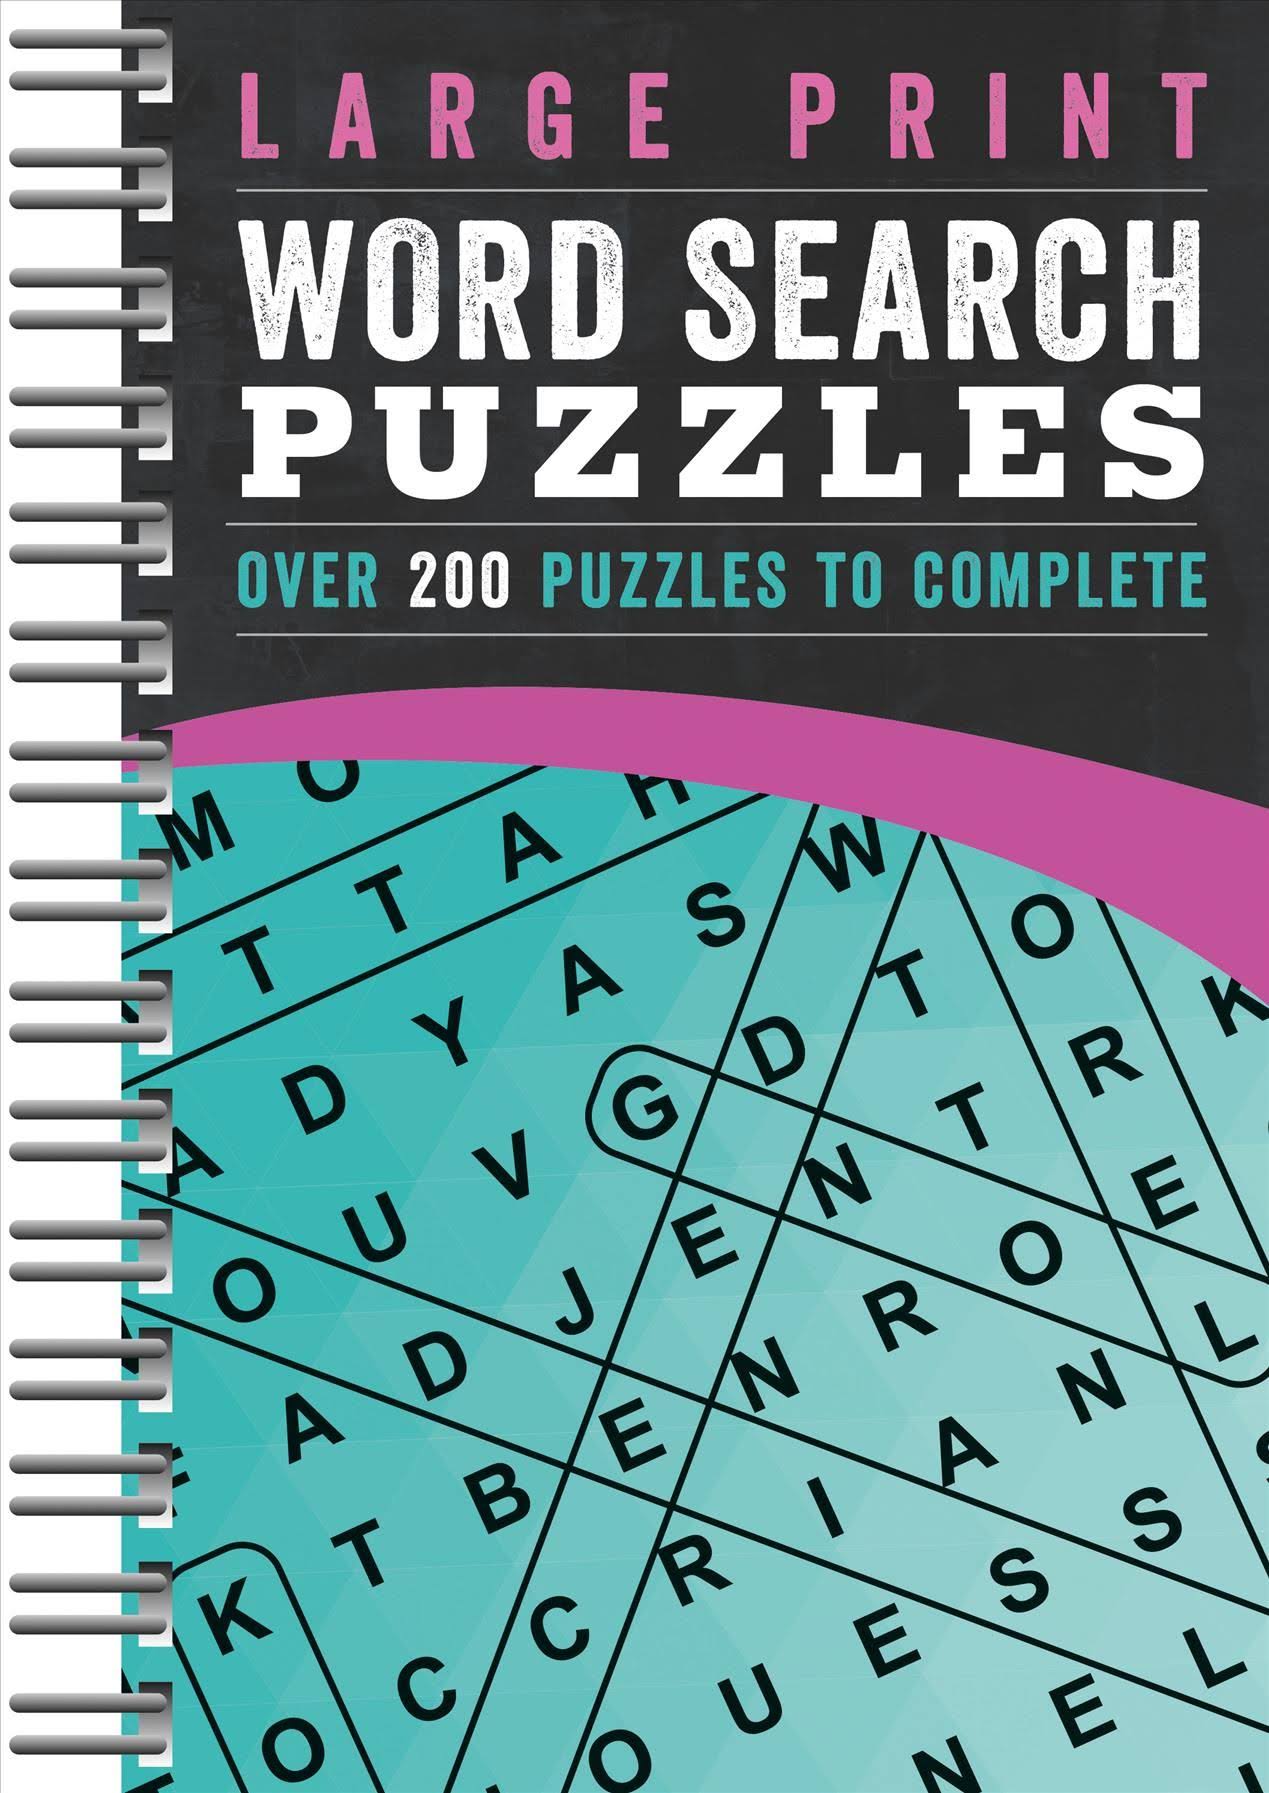 Large Print Word Search Puzzles: Over 200 Puzzles to Complete - Parragon Books